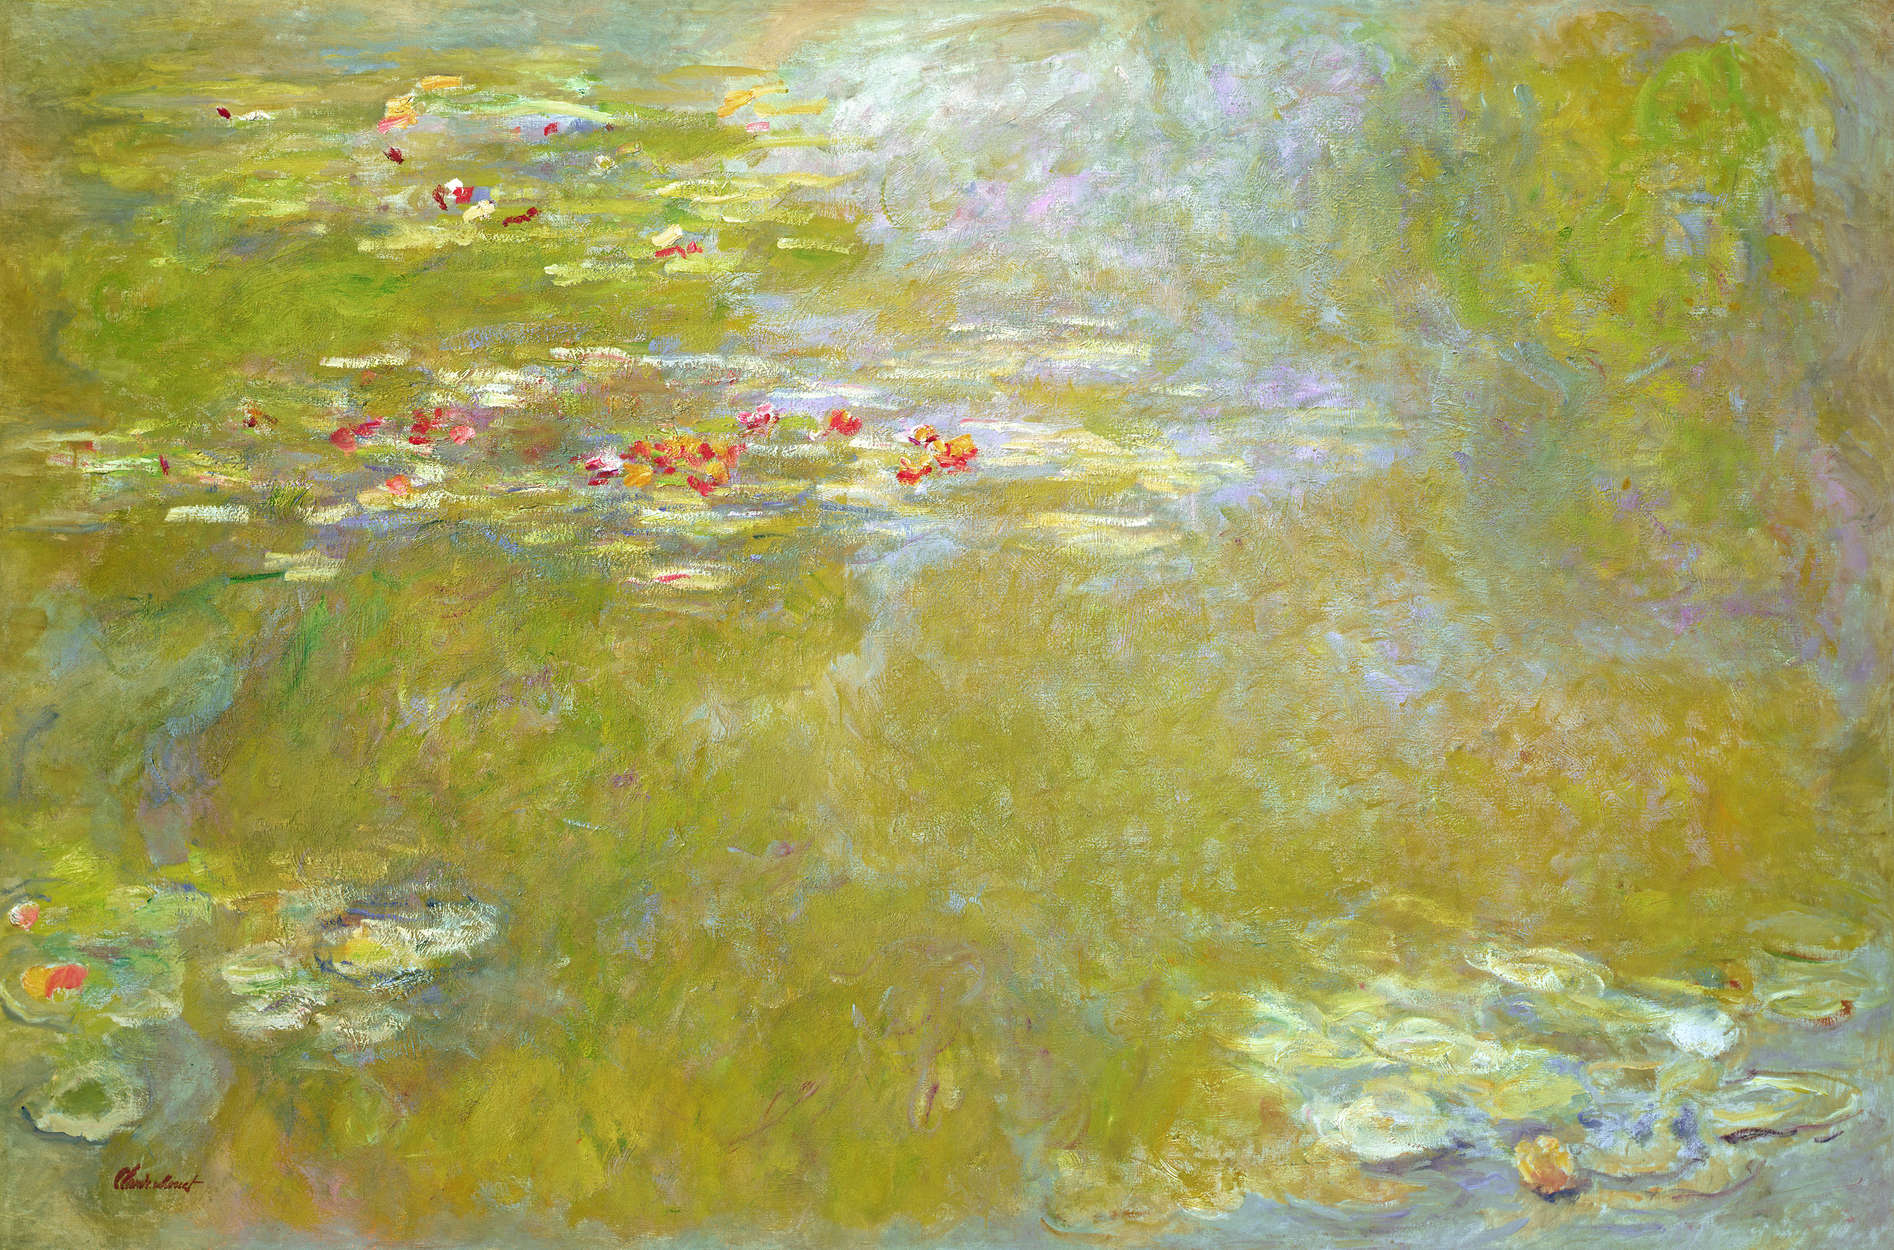             Photo wallpaper "The Nymphs" by Claude Monet
        